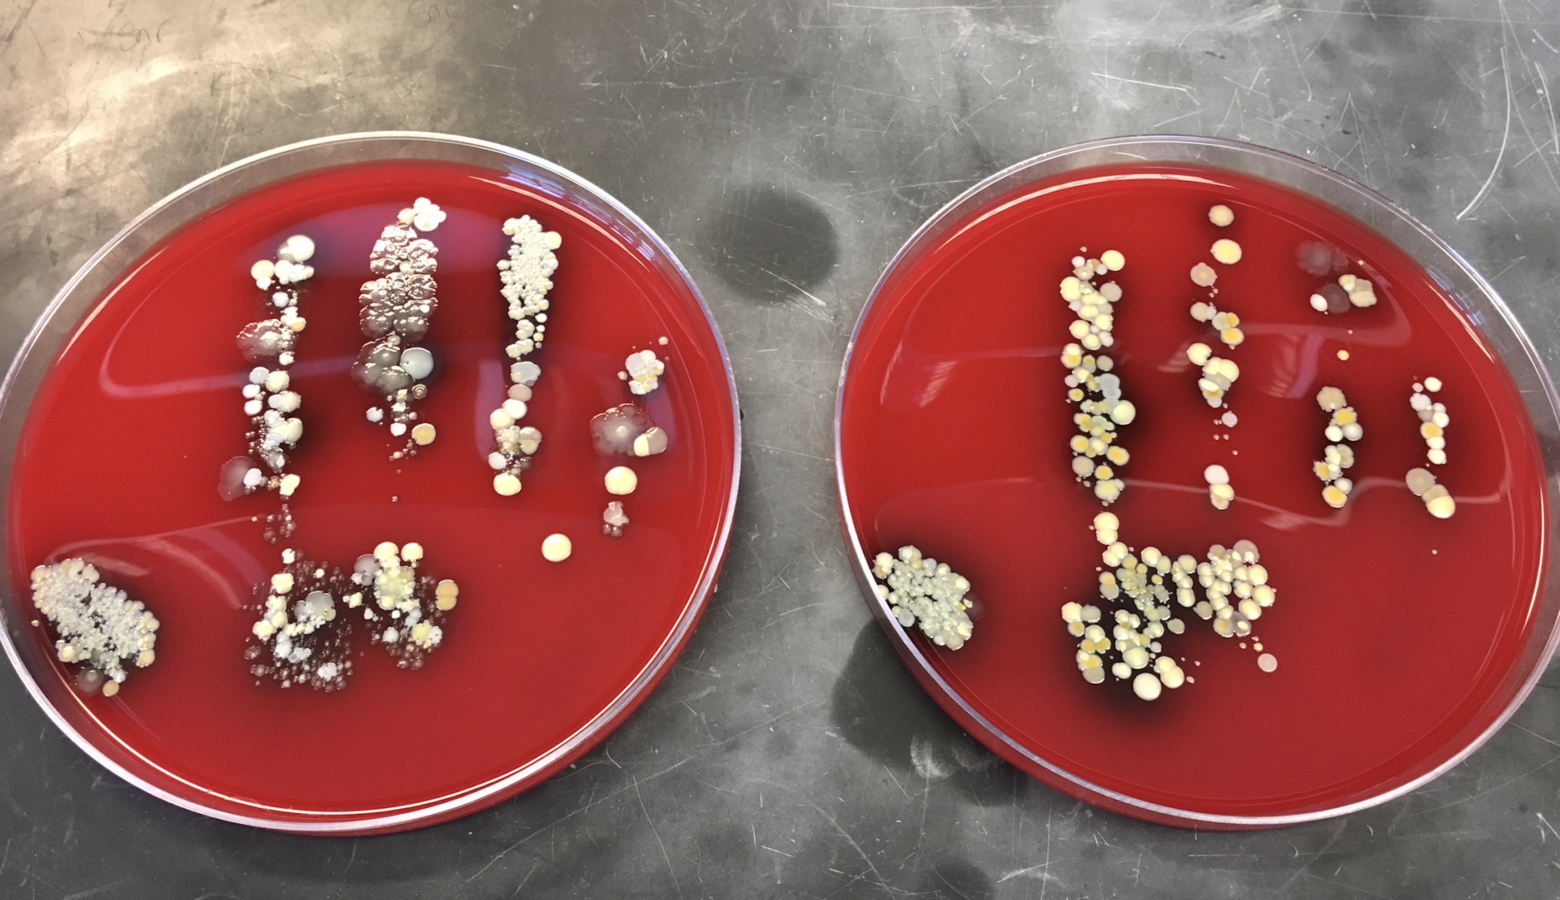 Reporter Jill Sheridan participated in the experiment. The petri dish on the left is her before, and the dish on the right is her after. (Photo courtesy IU Health pathology lab)